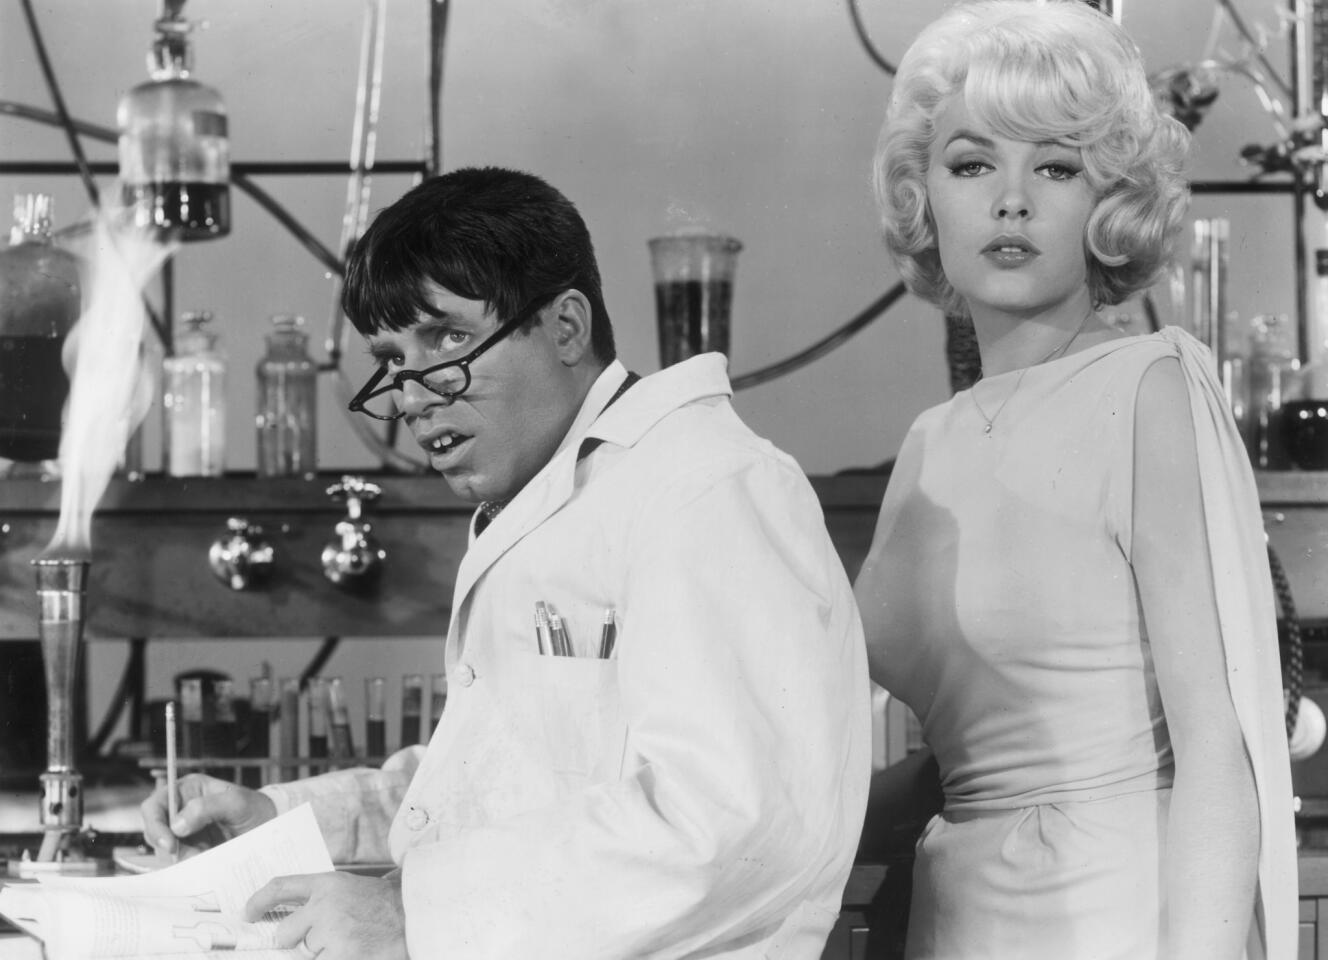 Jerry Lewis wears a lab coat and glasses as Stella Stevens poses next to him in a still from Lewis' film "The Nutty Professor" in 1963.